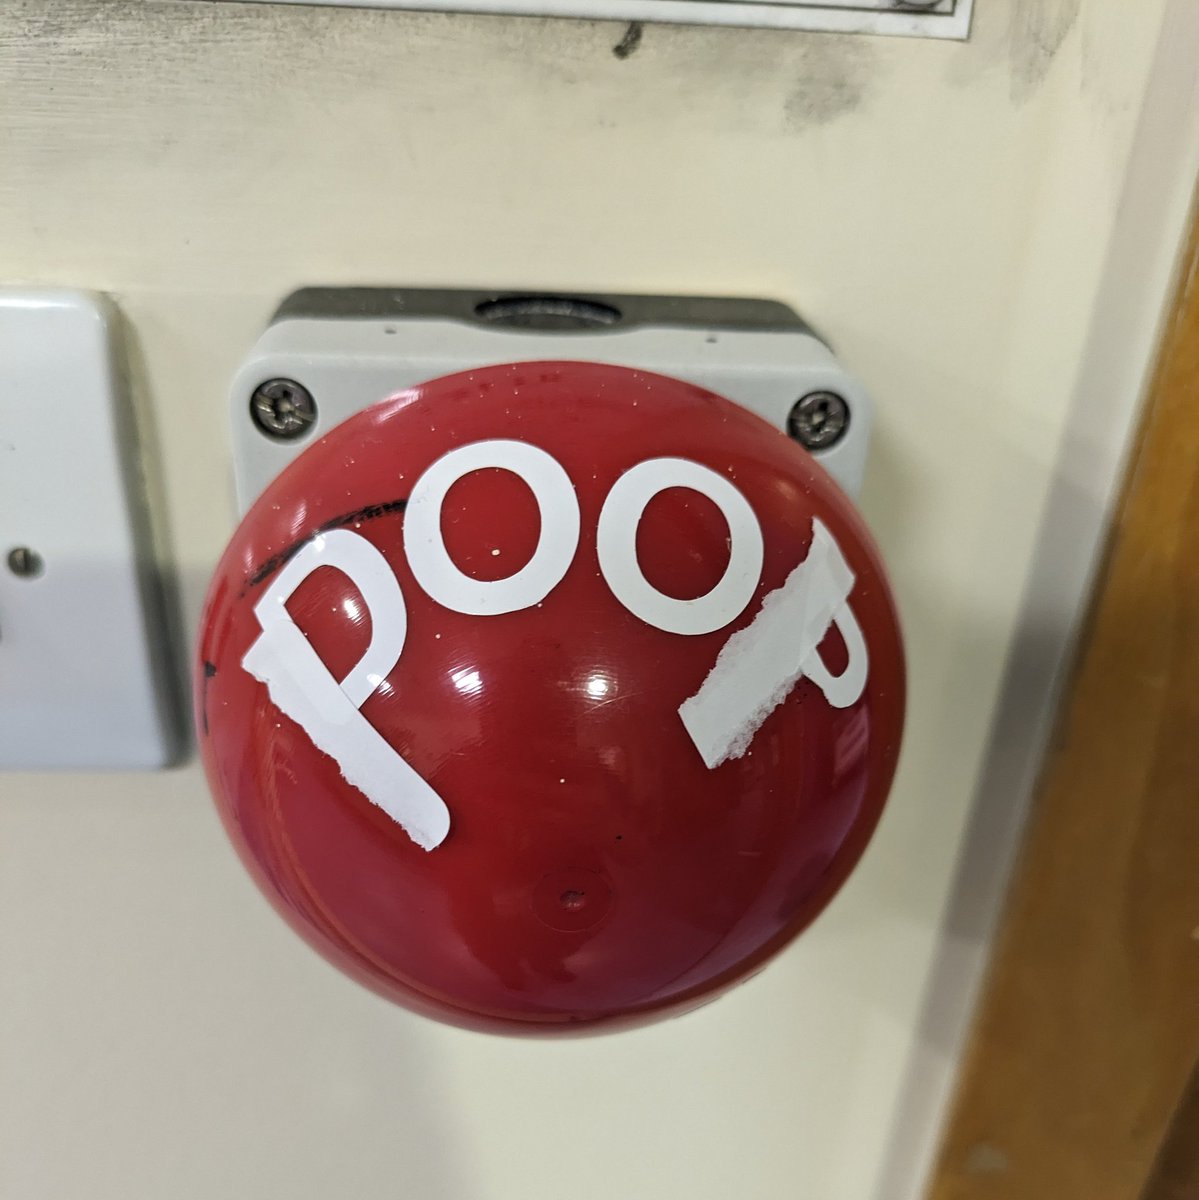 Other people - 'My research in medicine has pushed human knowledge forward'

Me - 'I've stuck some stickers on the ward 'DOOR' button to make it better'

#MemeReg #MedTwitter #MedicalMemes #Poop